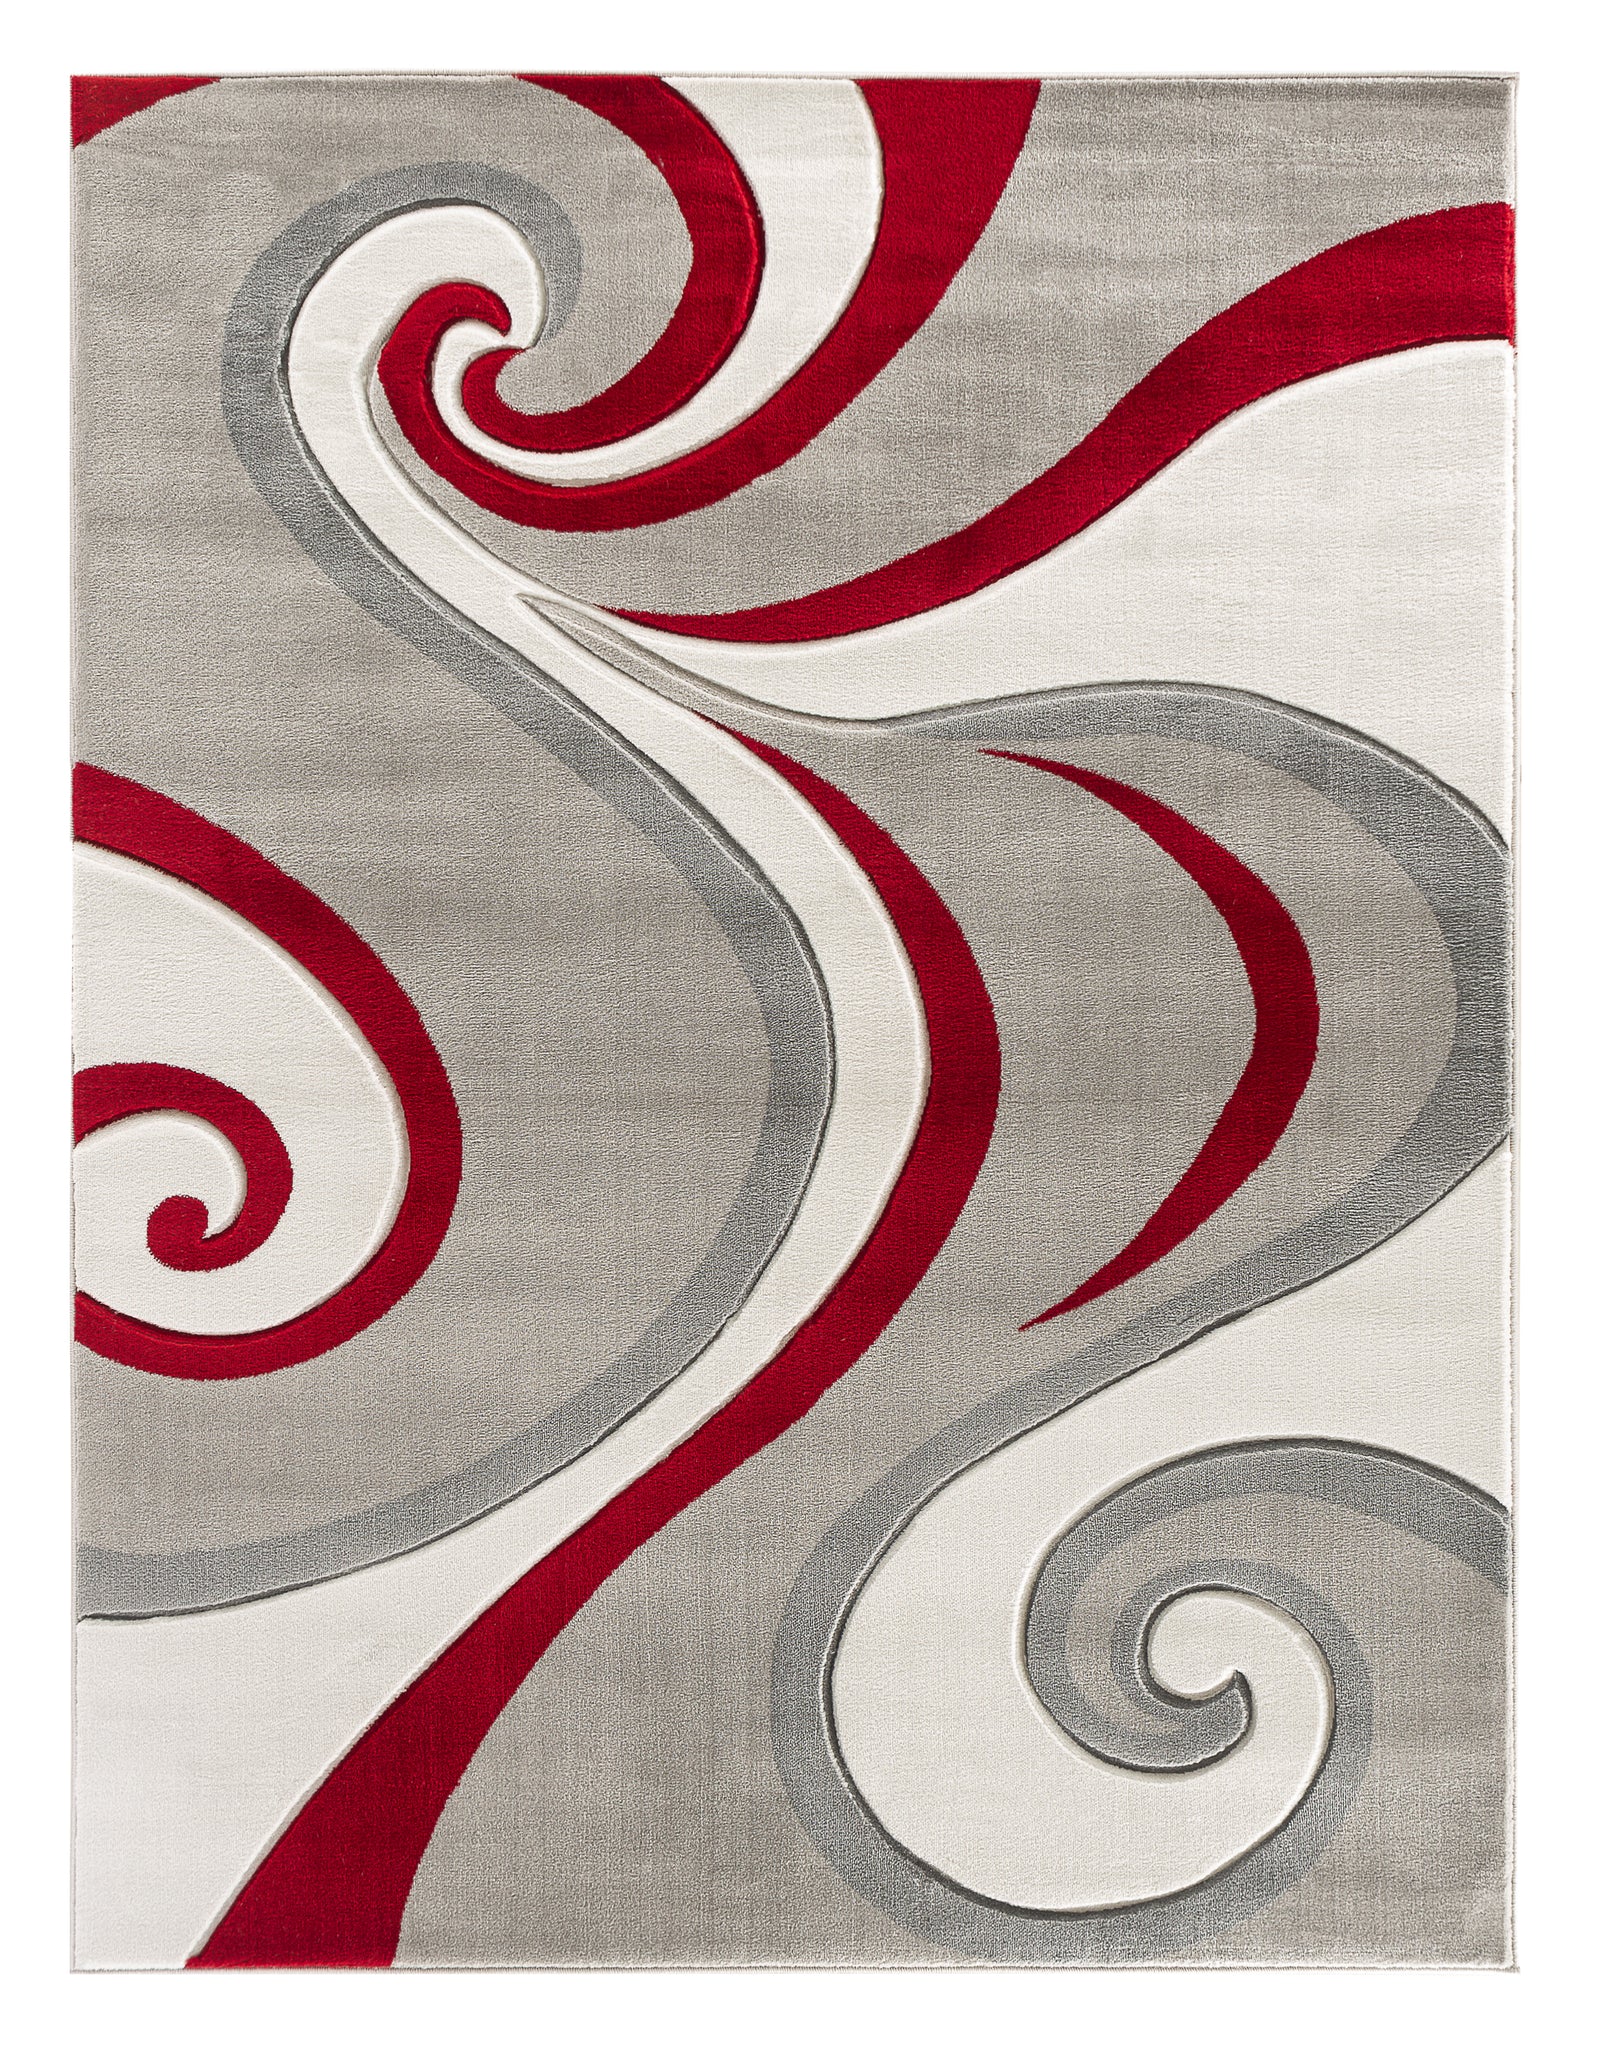 Red Swirls Hand-Carved Soft Living Room Area Rug